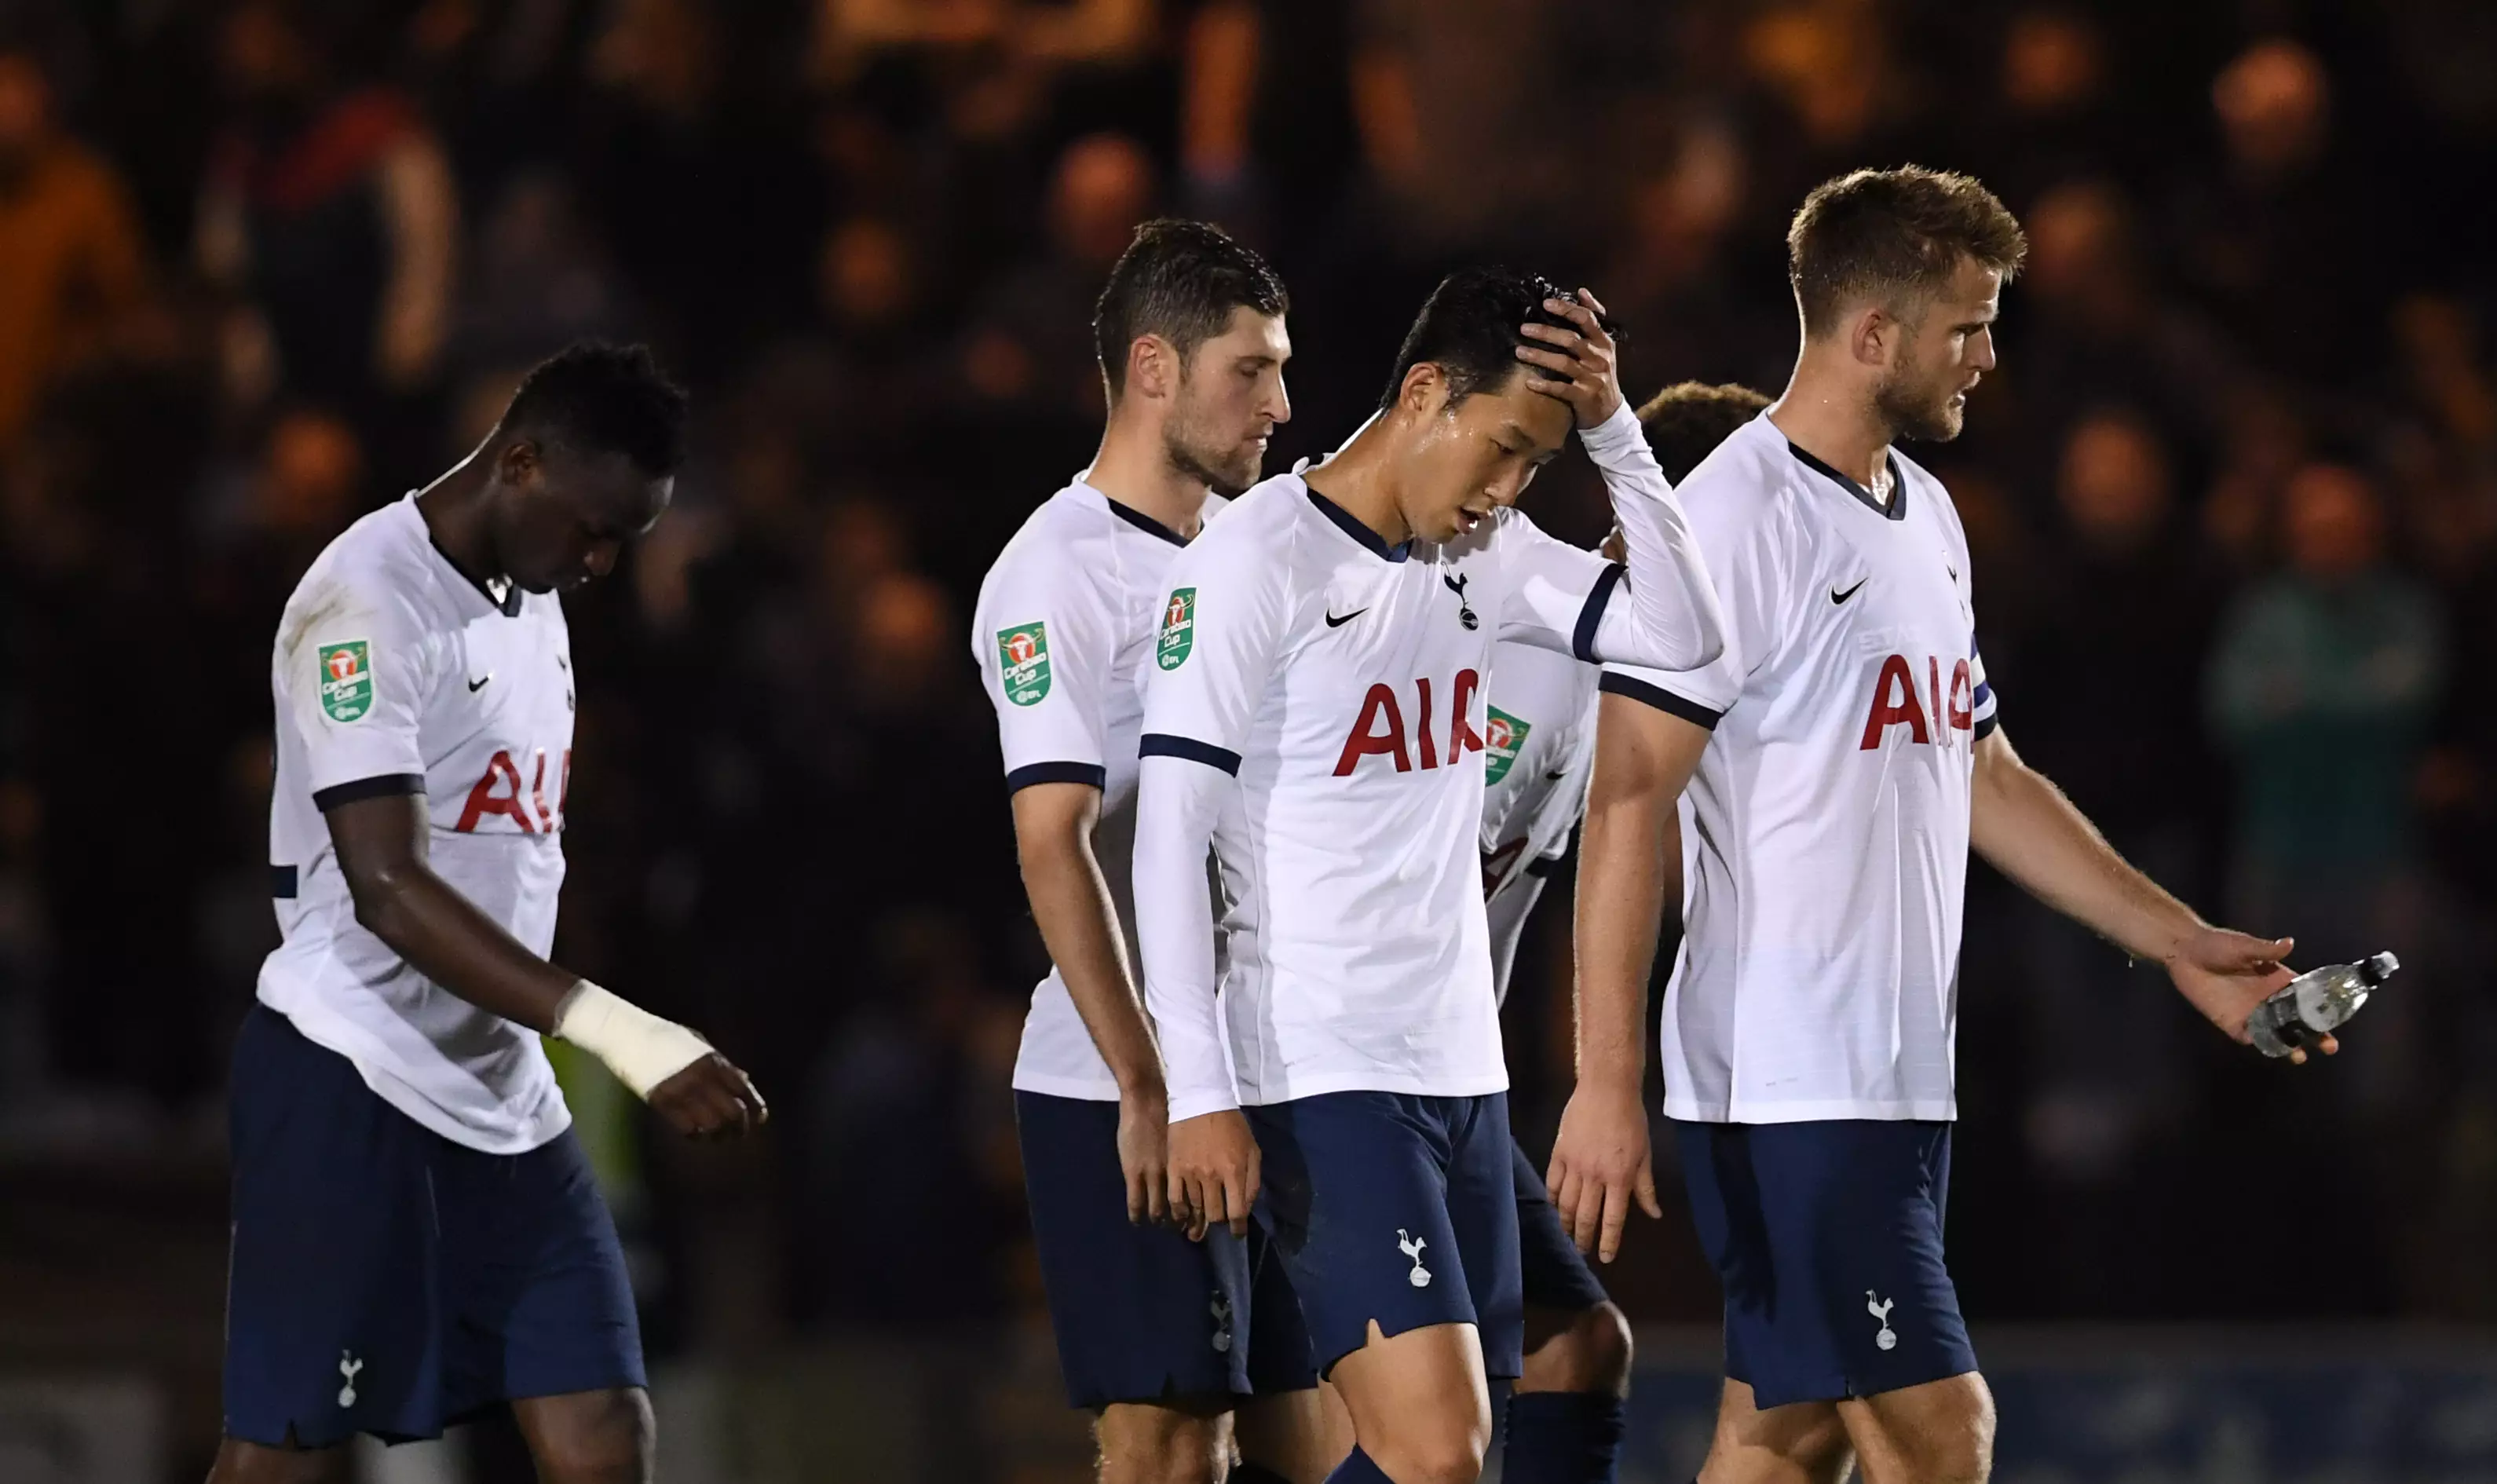 Spurs players after the loss to Colchester. Image: PA Images